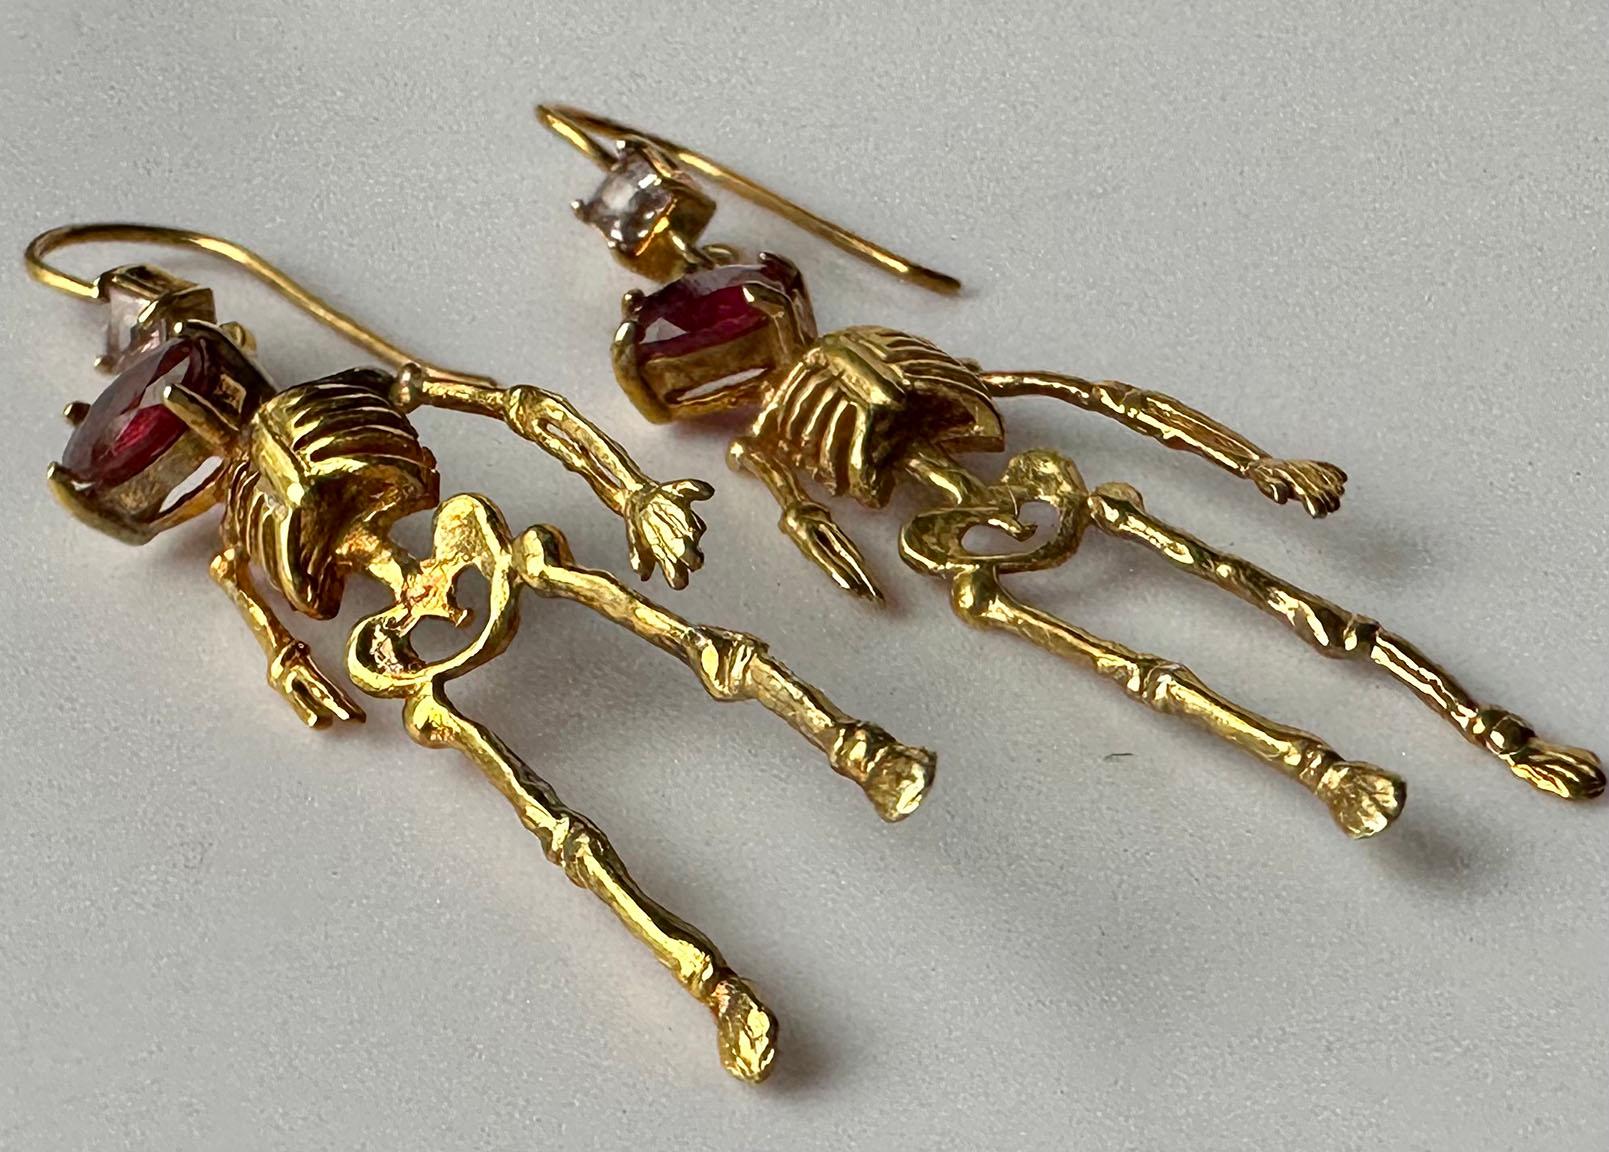 Silver Skeleton Earrings set with Ruby and Tourmaline For Sale 7